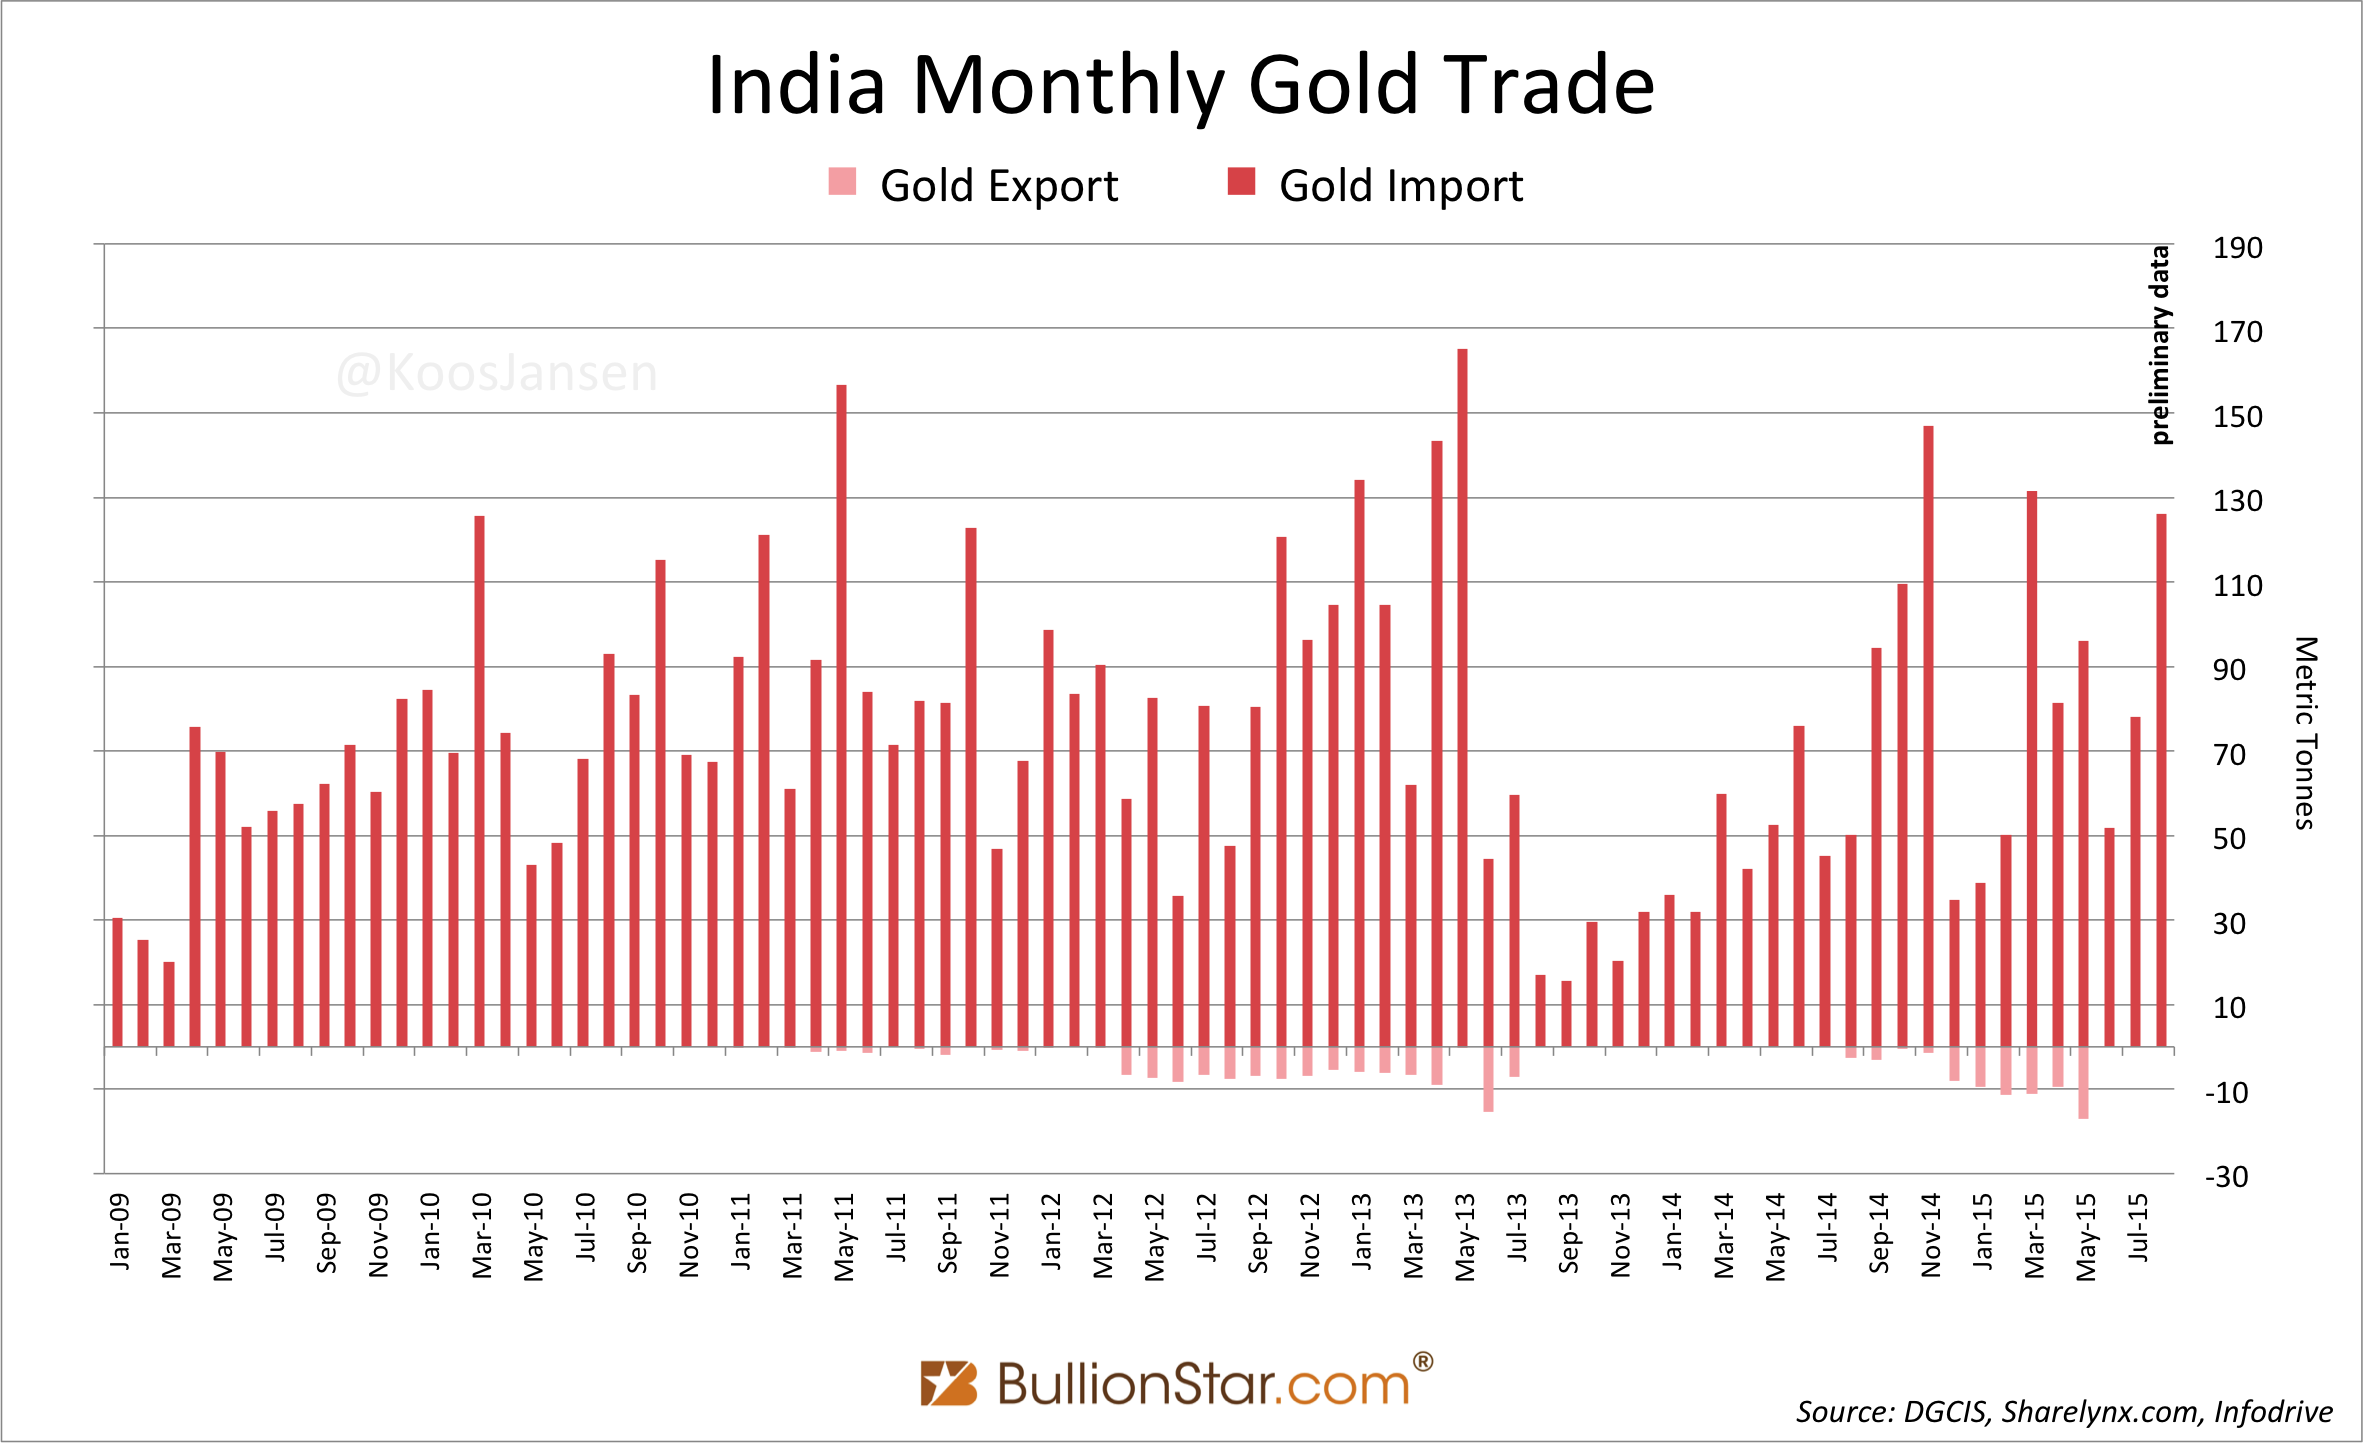 India Precious Metals Import Explosive - August Gold 126t, Silver 1,400t